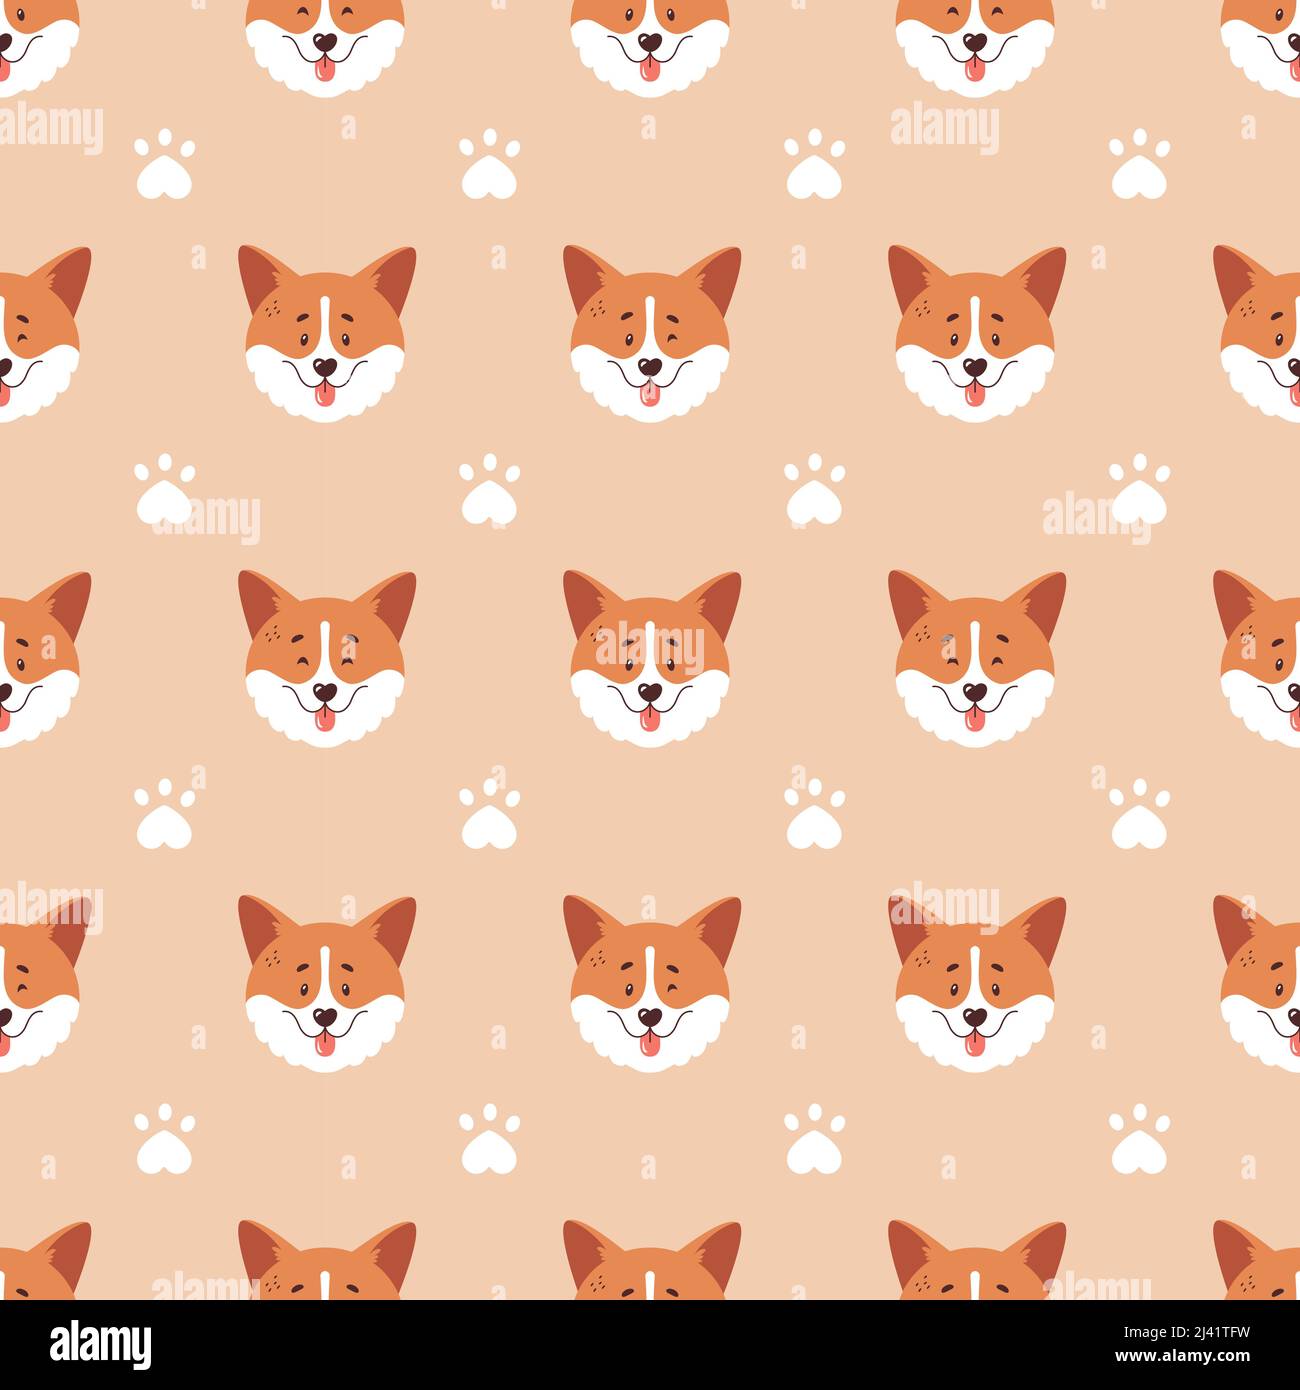 Corgi seamless pattern. Cute smiling welsh corgi faces and paw prints. Happy dog characters. Stylish vector background. Stock Vector